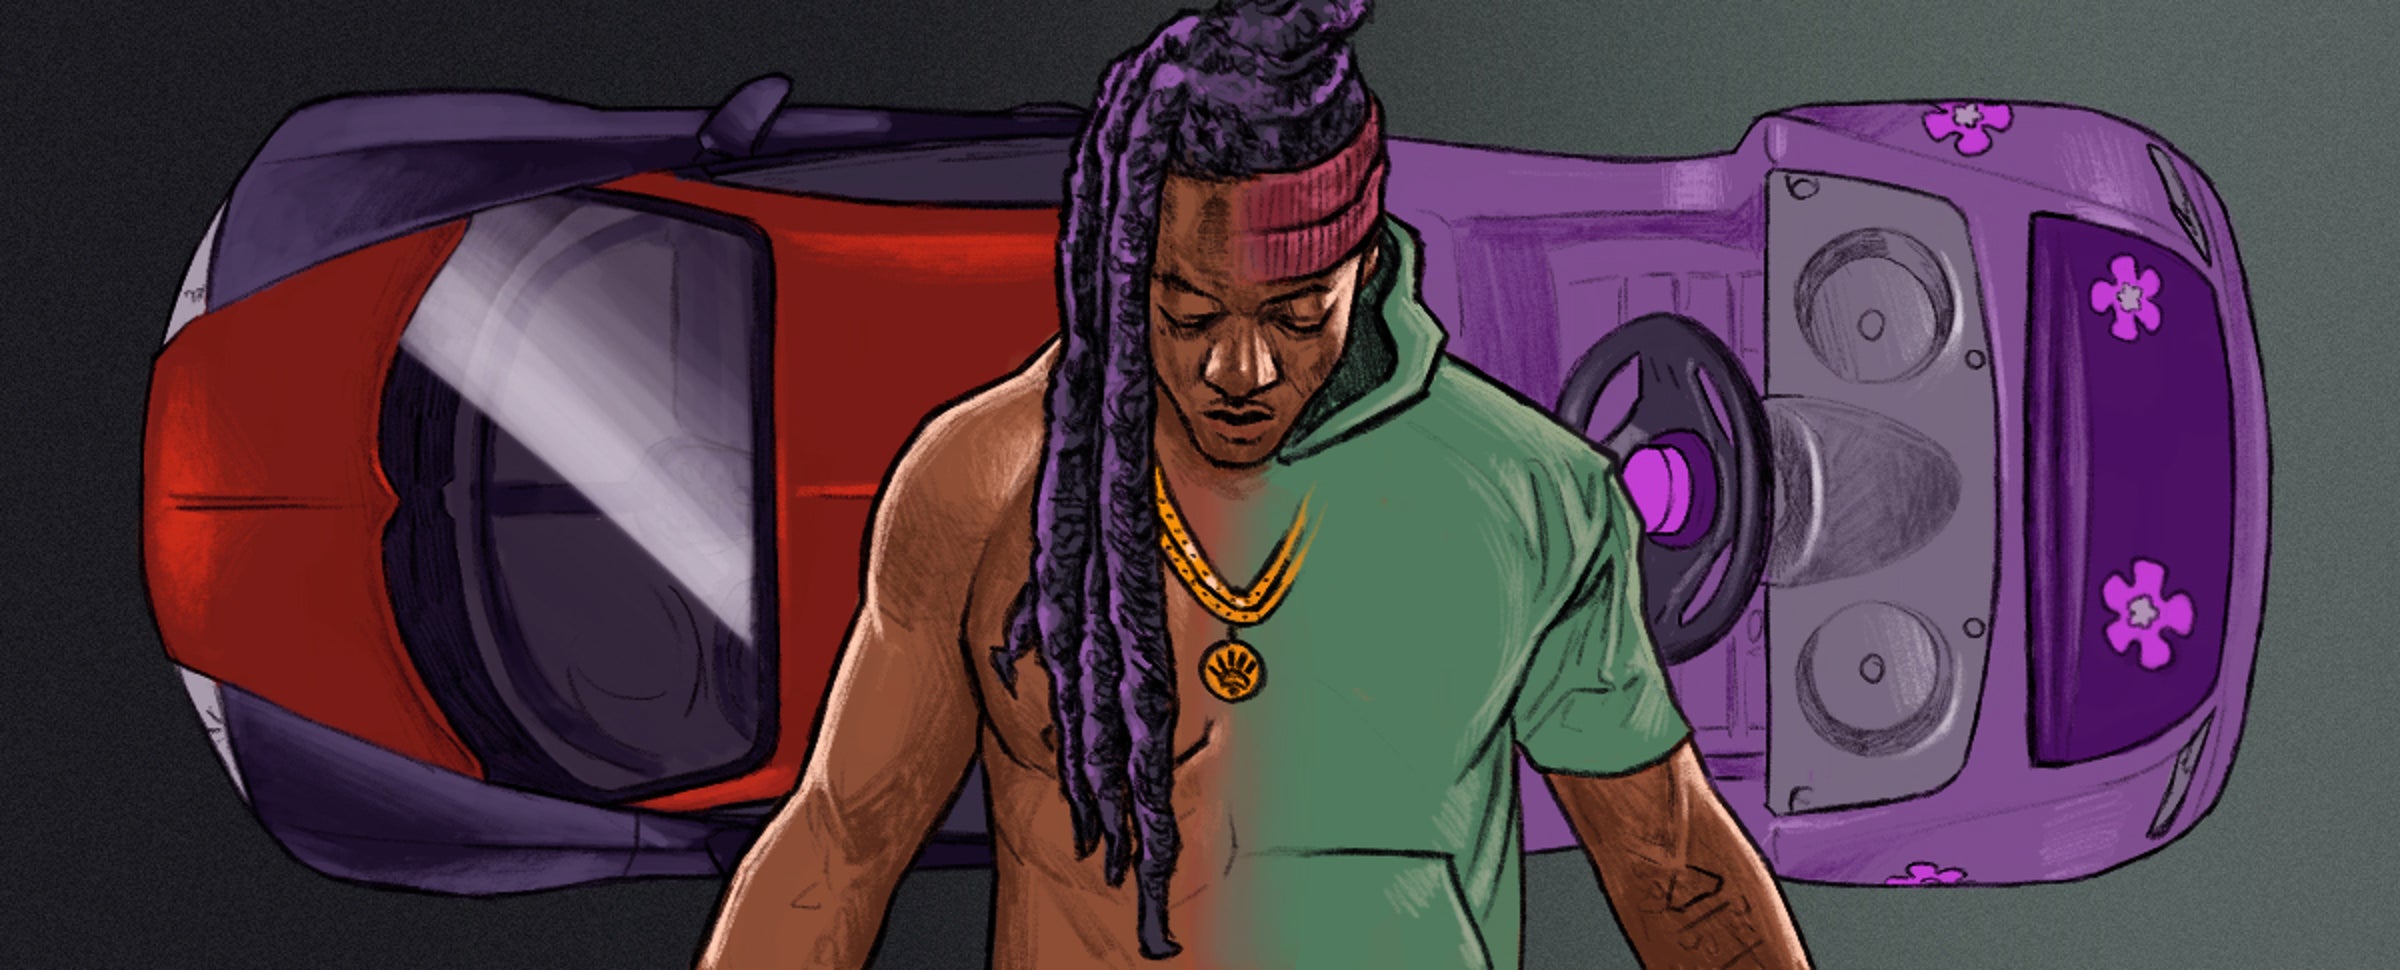 How Ace Hood Went From Rapping About Cars to Rapping About Fatherhood